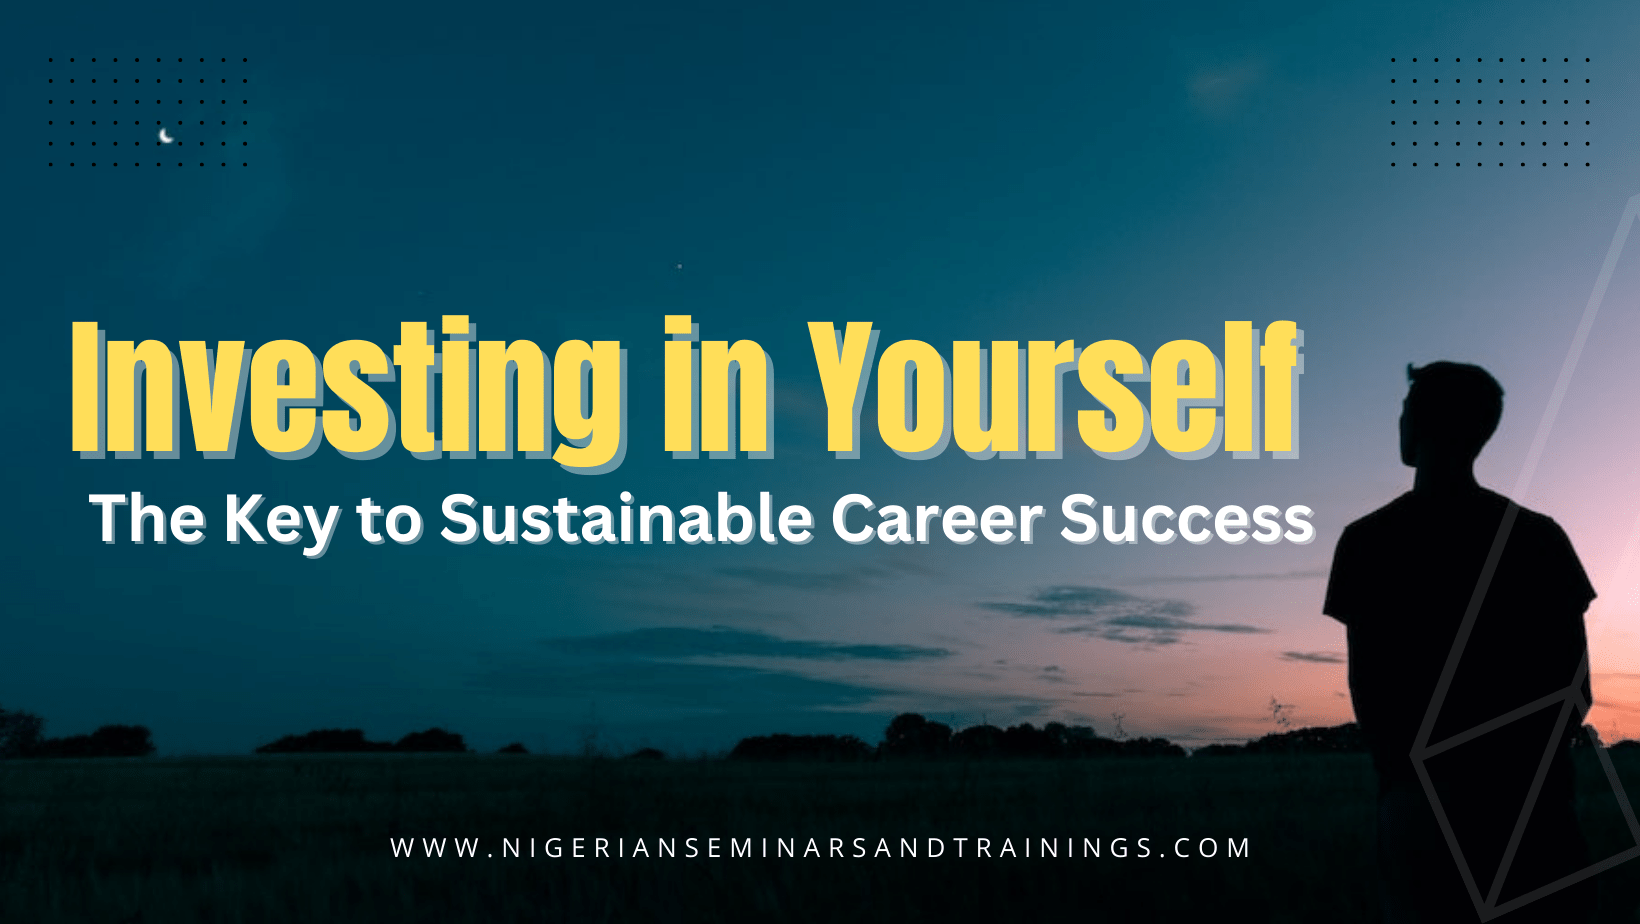 Investing in Yourself: The Key to Sustainable Career Success